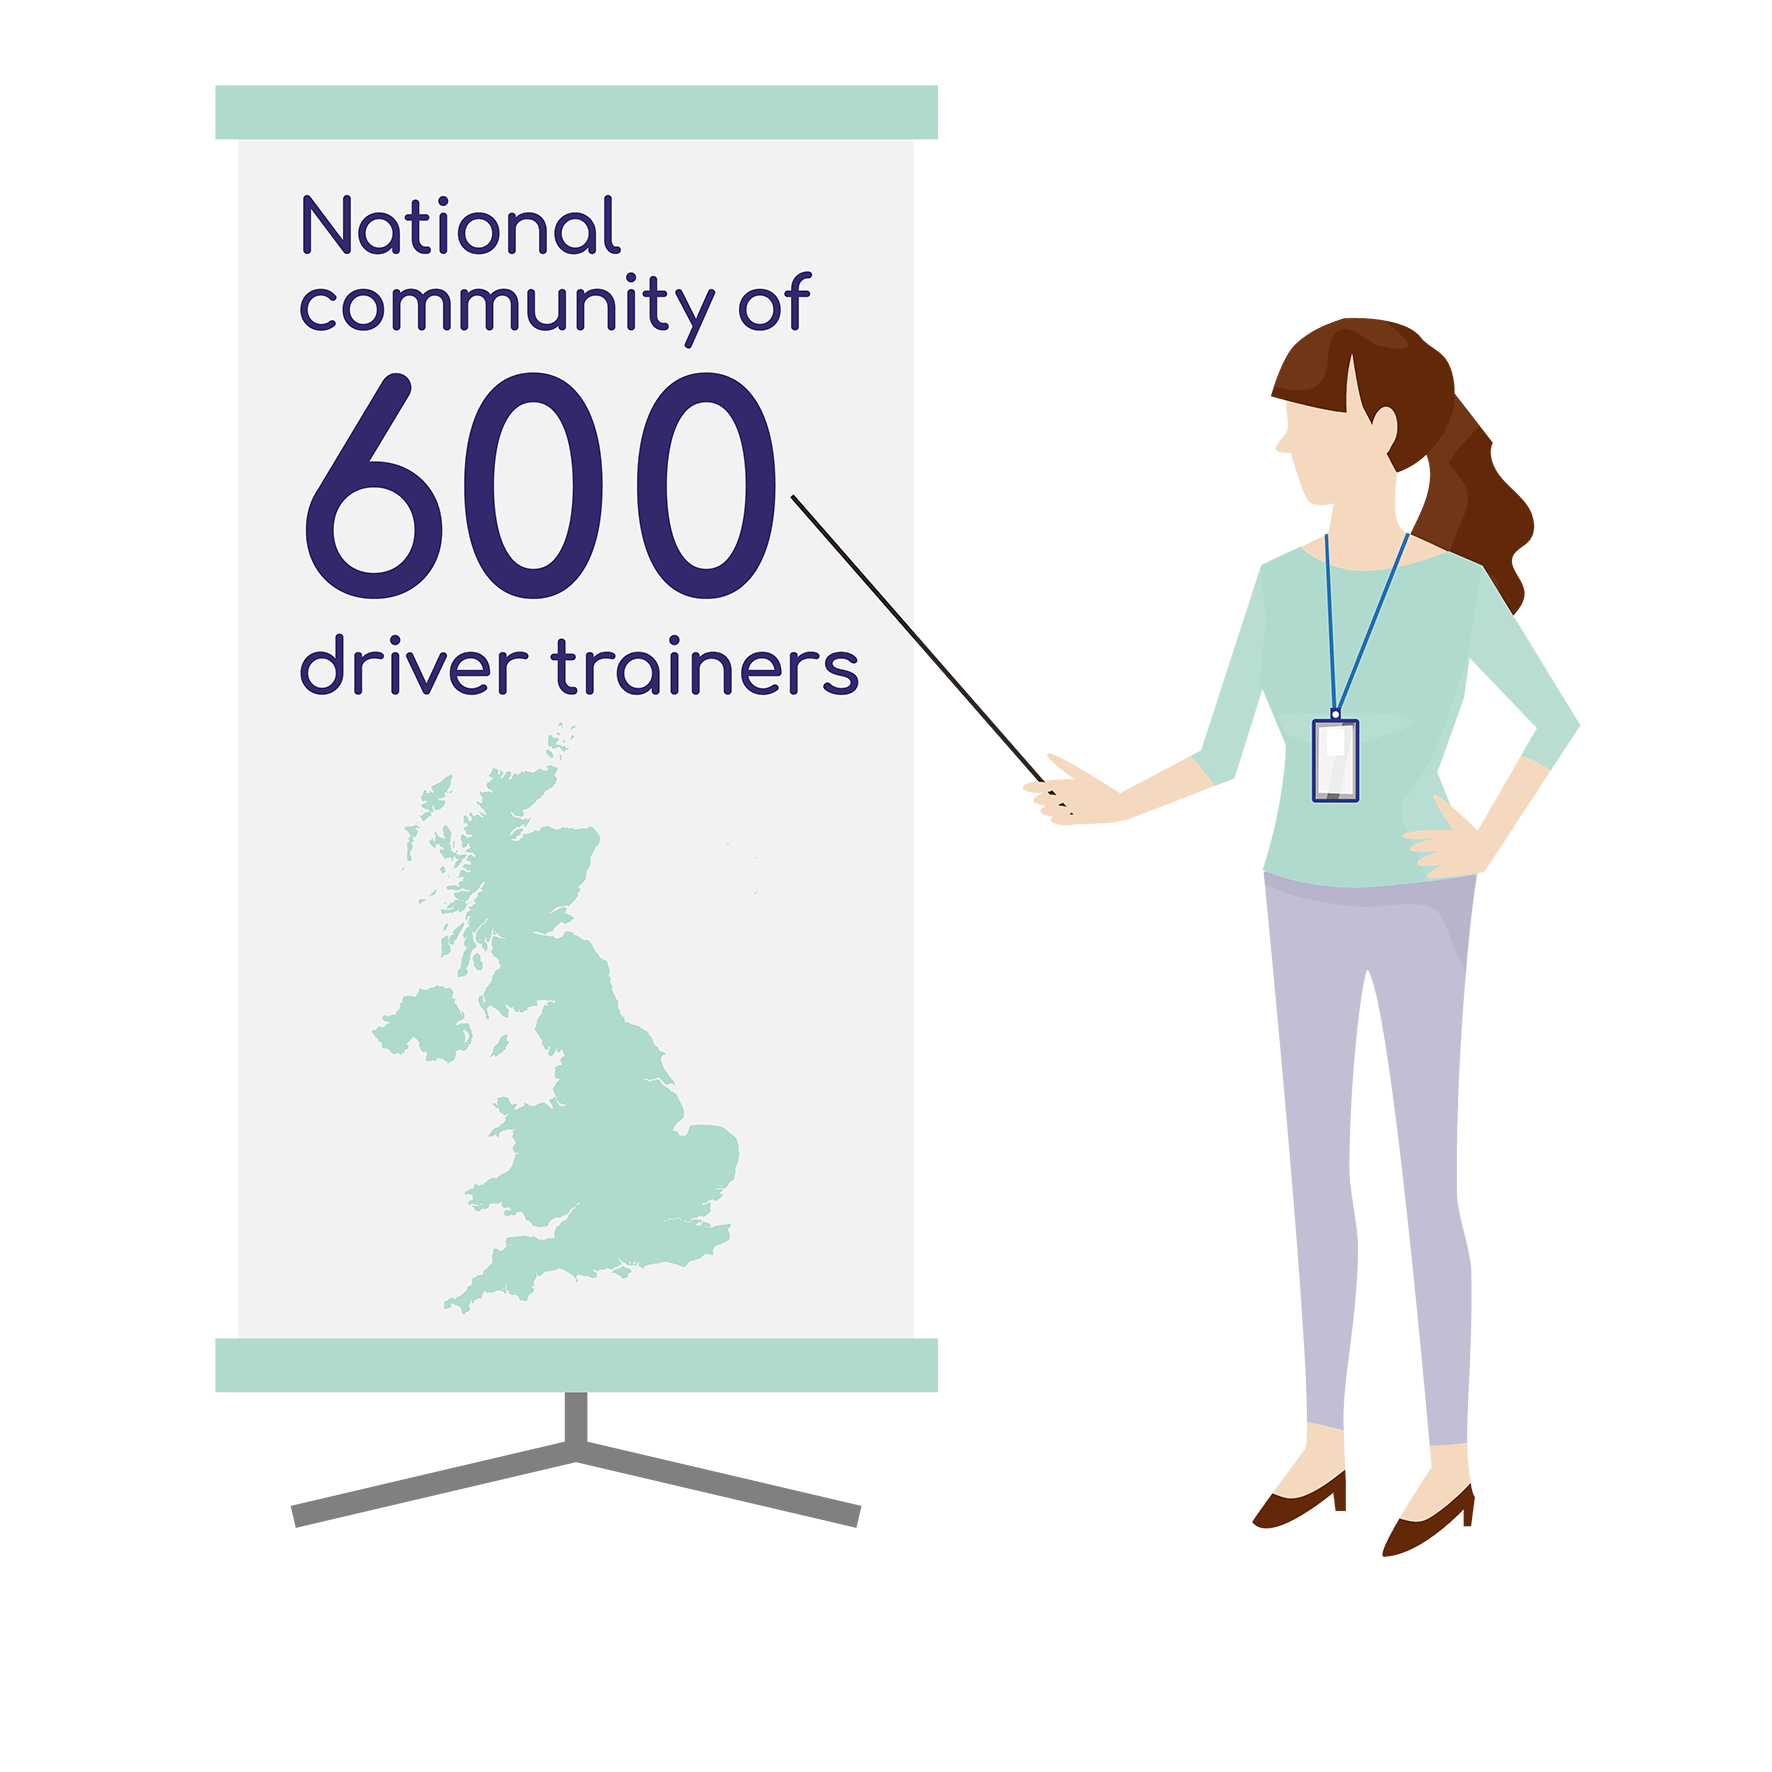 Community of 600 driver trainers